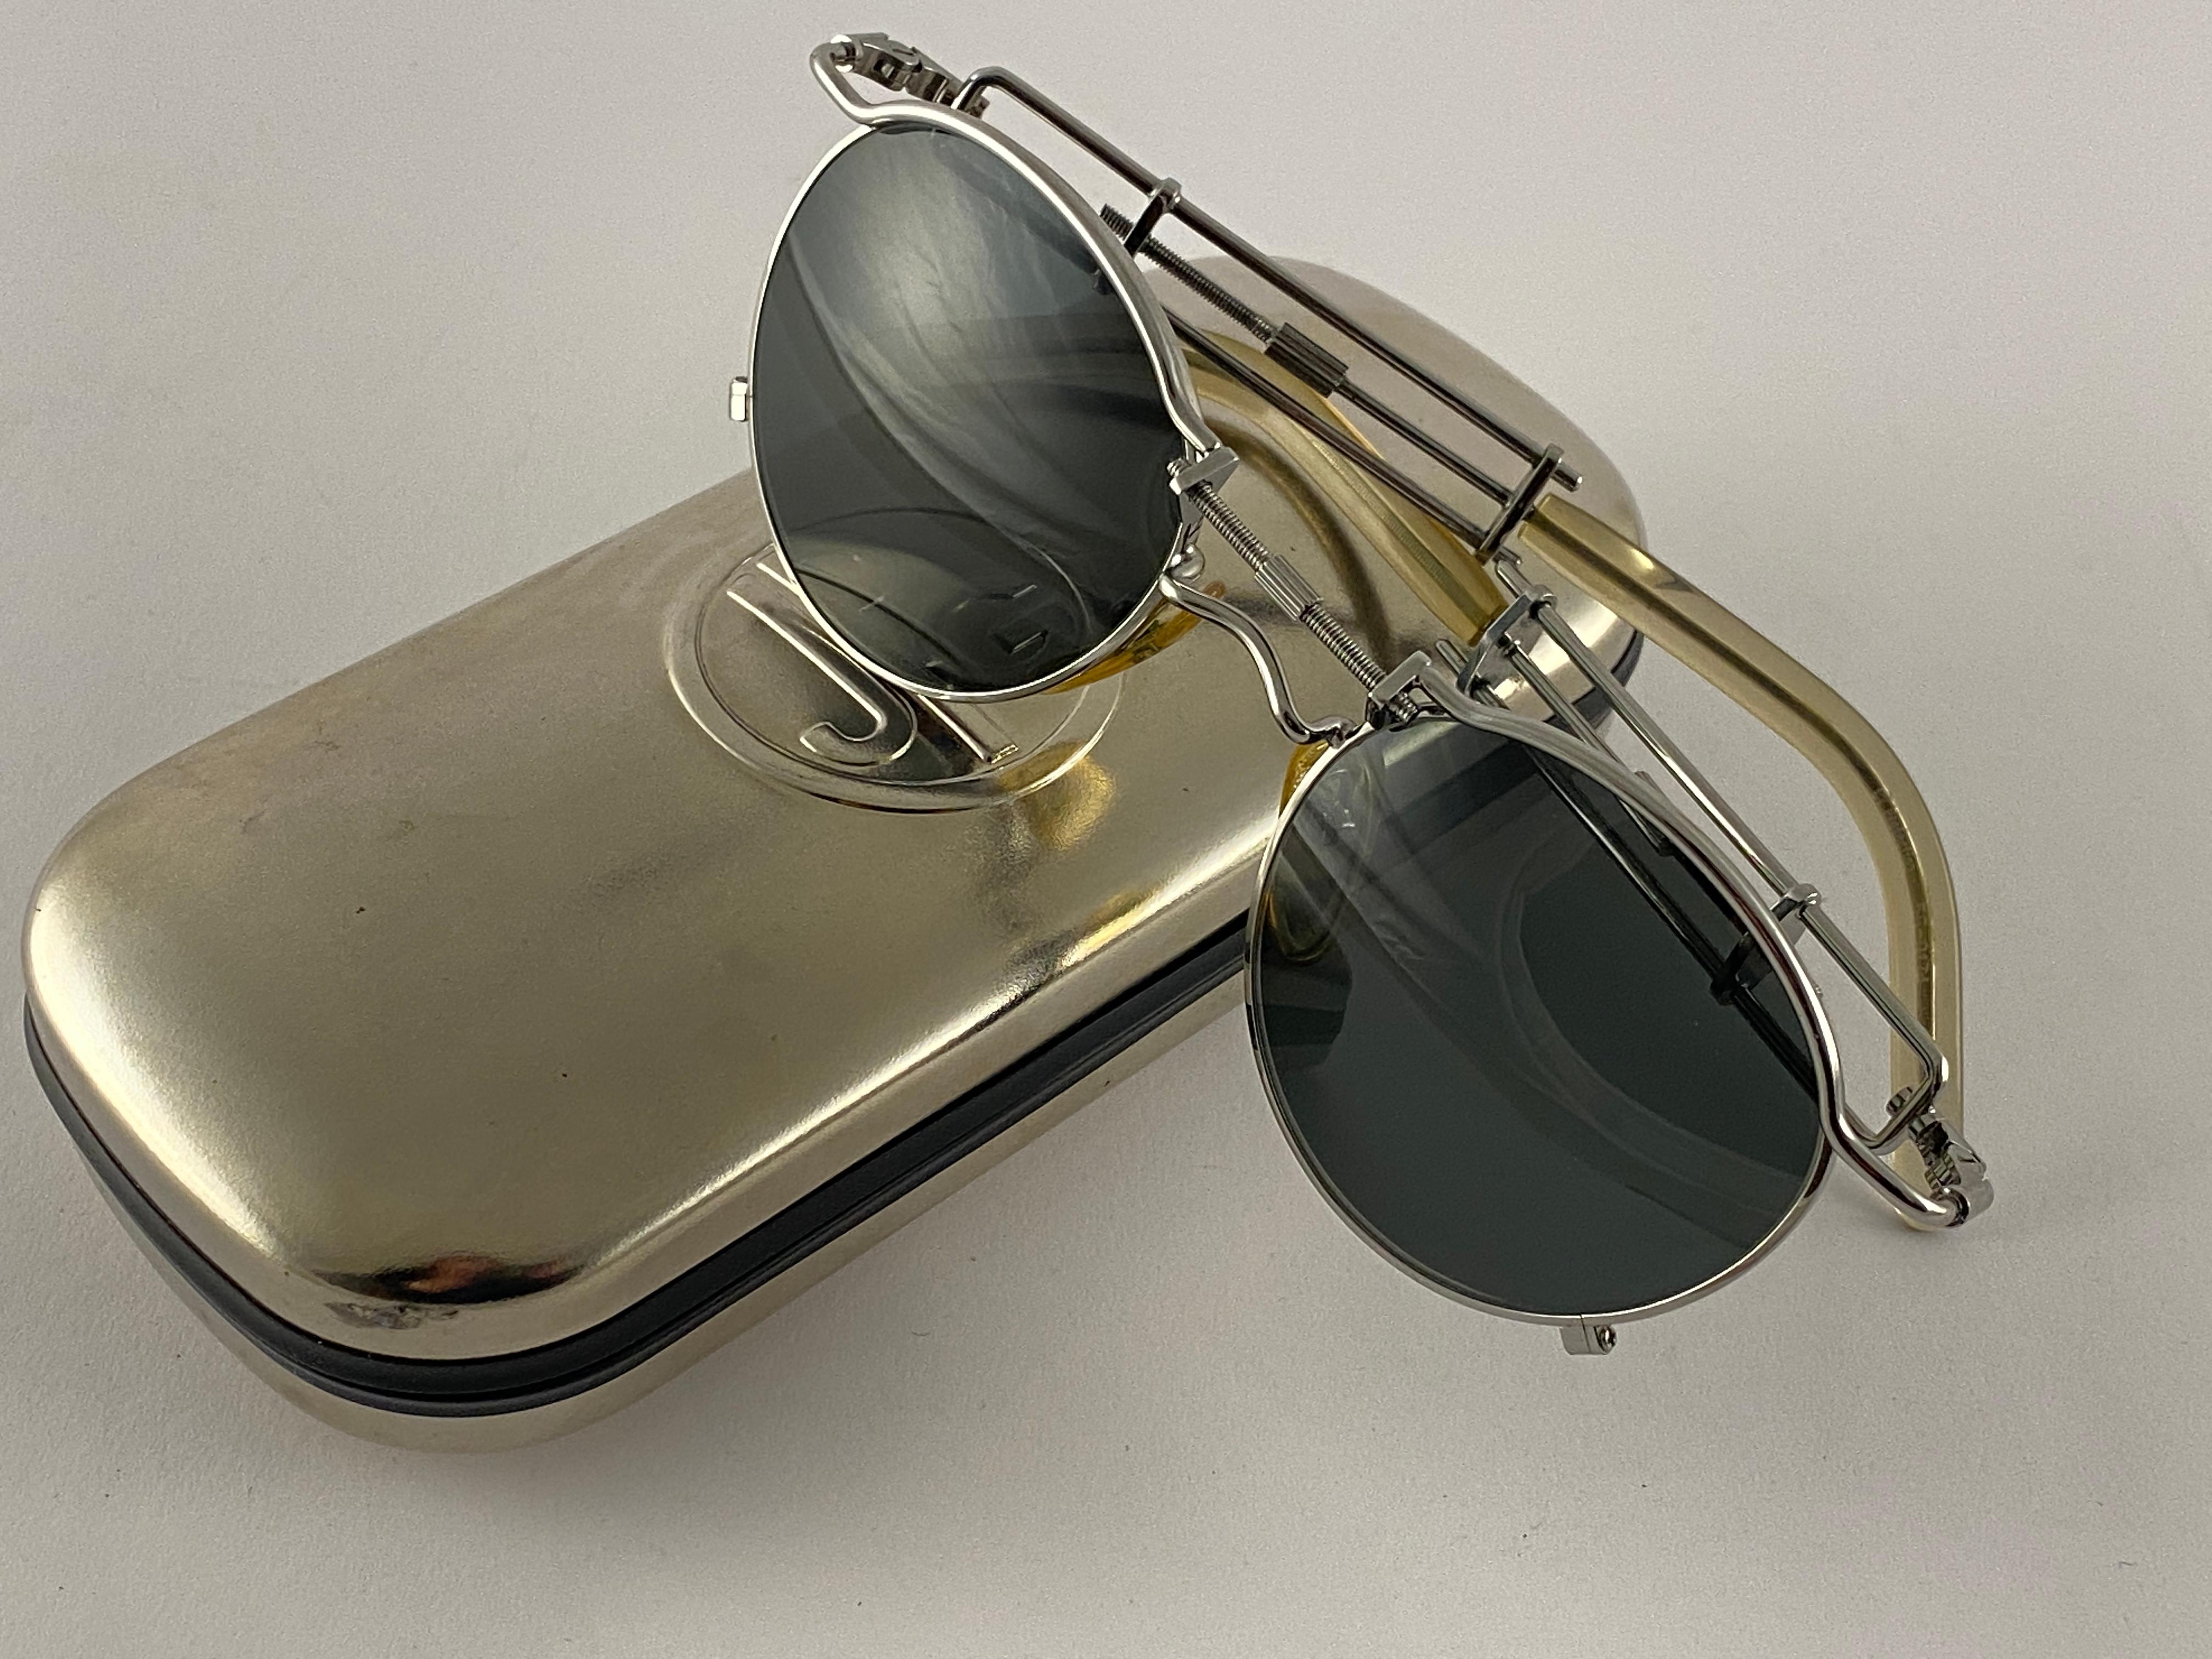 Vintage Jean Paul Gaultier 56 0174 Round Grey Lens 1990's Sunglasses Japan In Excellent Condition For Sale In Baleares, Baleares